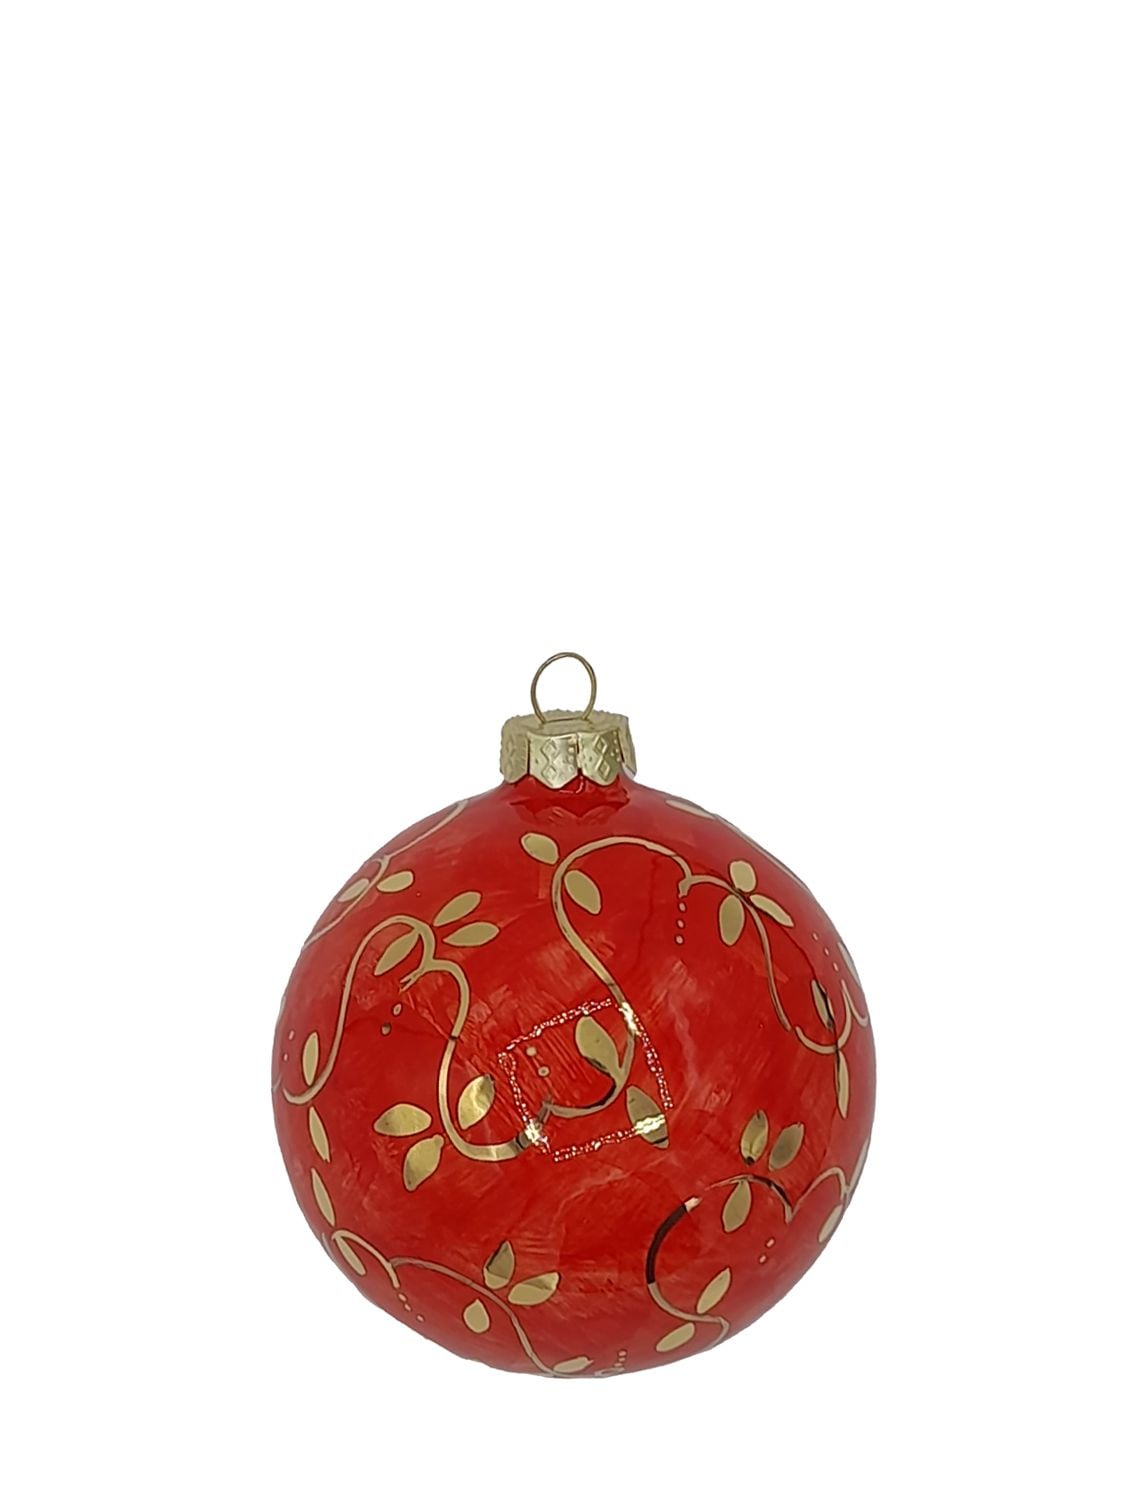 Les Ottomans Handpainted Christmas Ball In Red